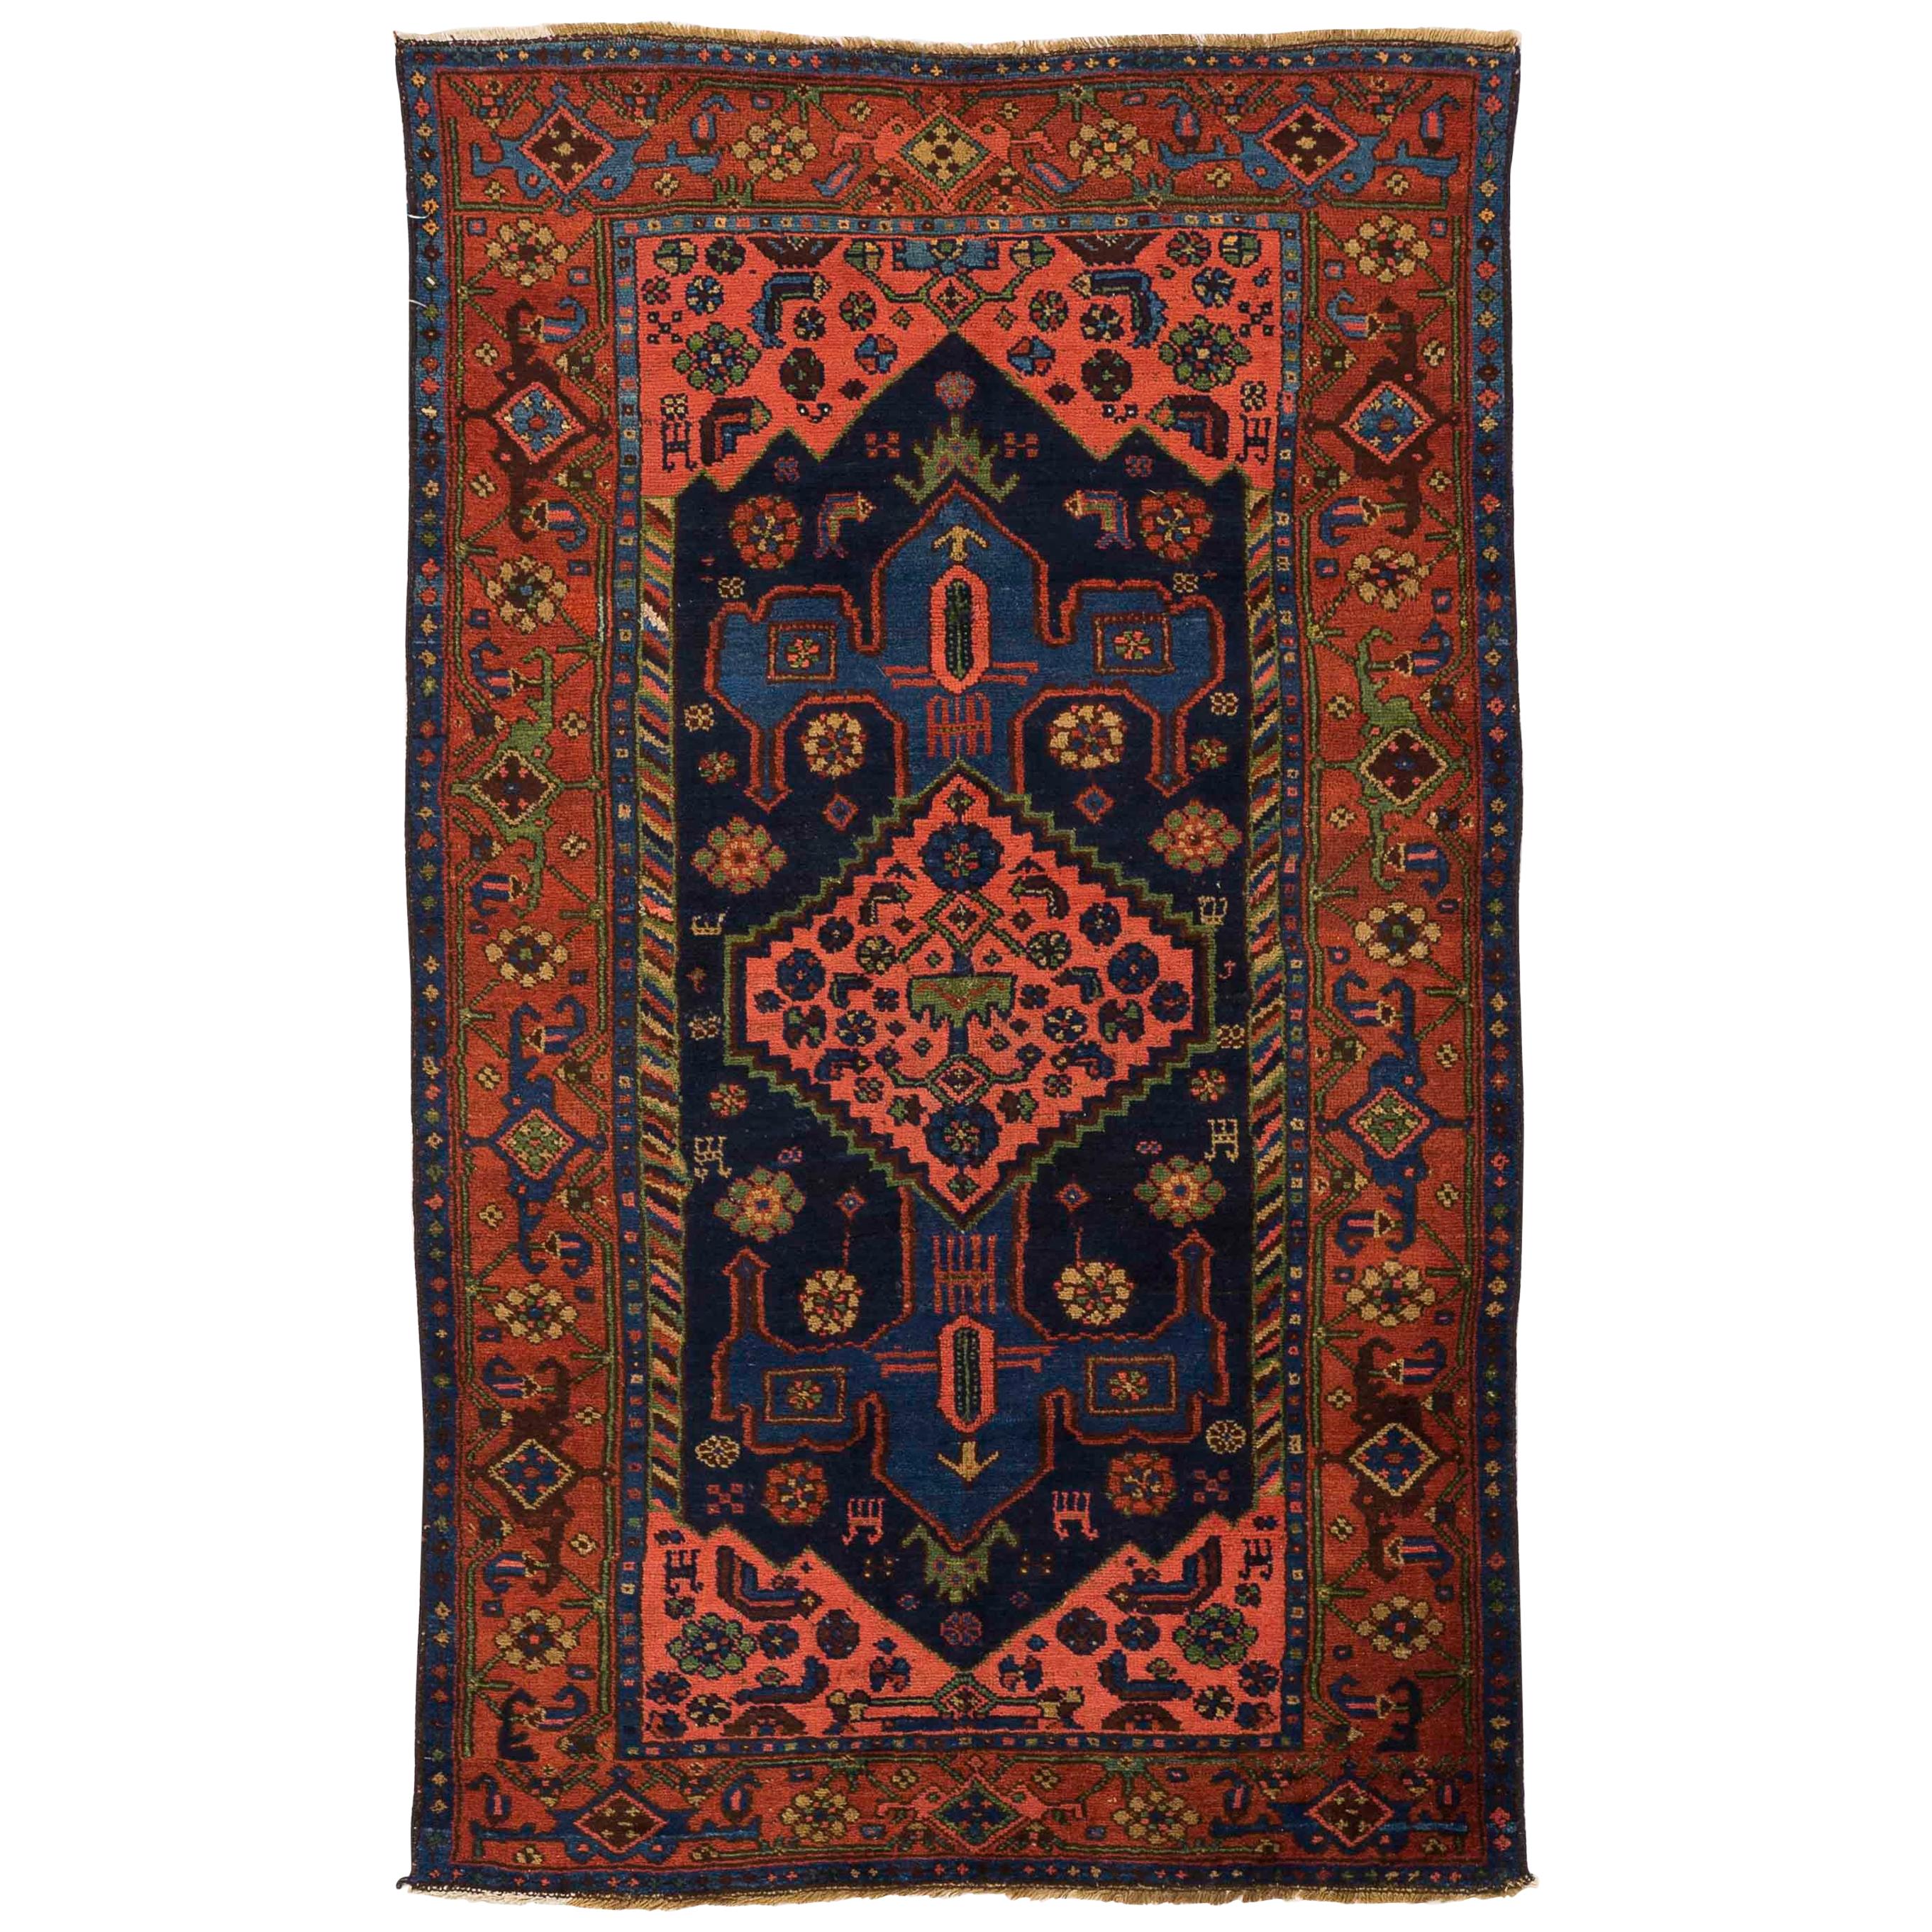 Antique Persian Hamedan Rug with Red and Blue ‘Anchor’ Patterns on Center Field